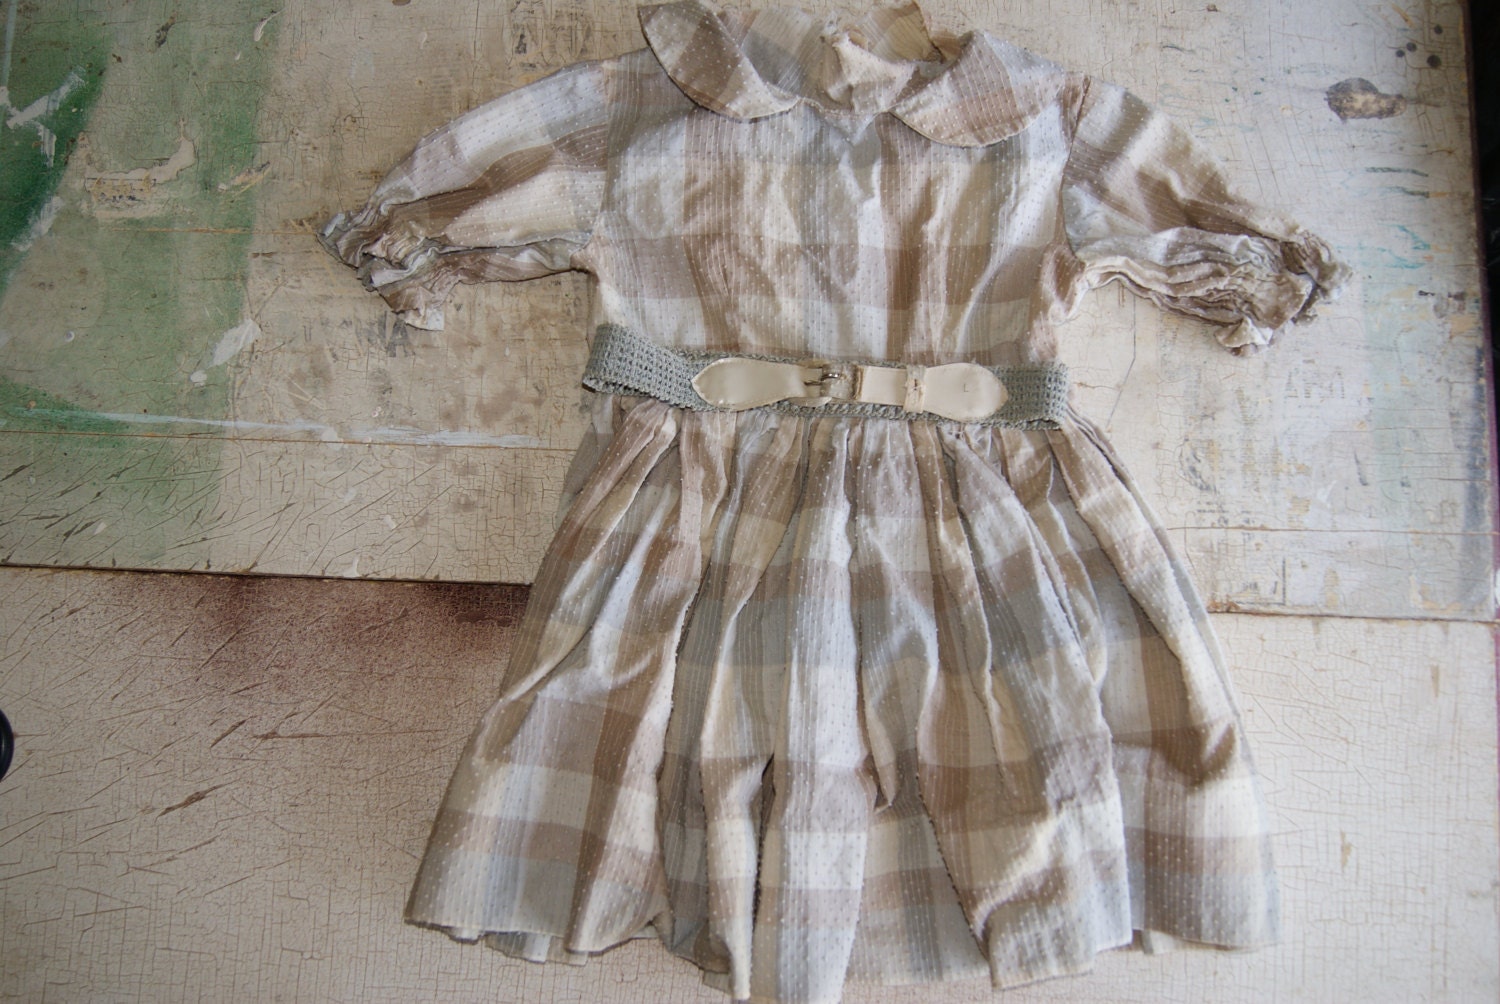 Vintage Handmade Childs Or Doll Dress With Belt Dotted Swiss 1950s